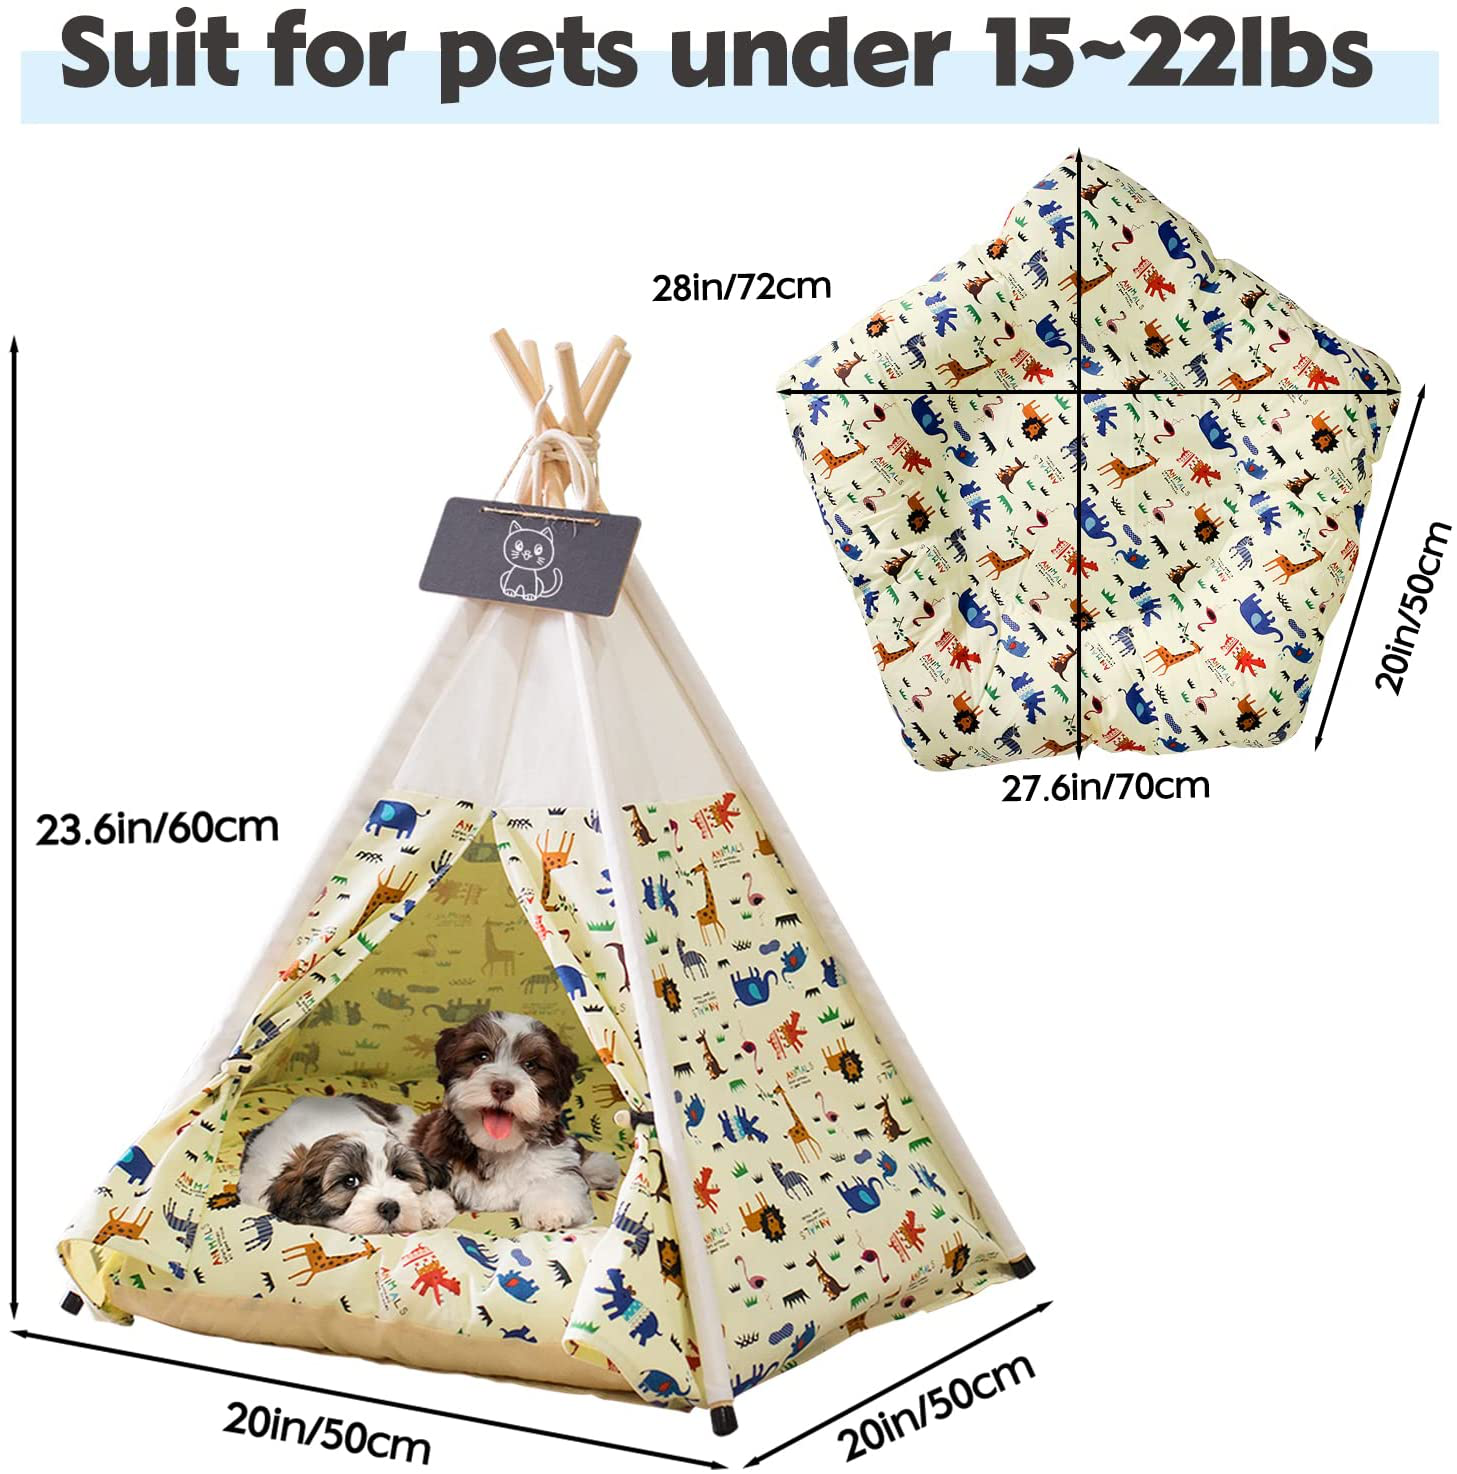 Pet Teepee with Thick Cushion ,Dogs/Puppy Pet Houses with Bed,Portable Indoor Dog Tents Pet Houses Bed Easy to Assemble (Animal)